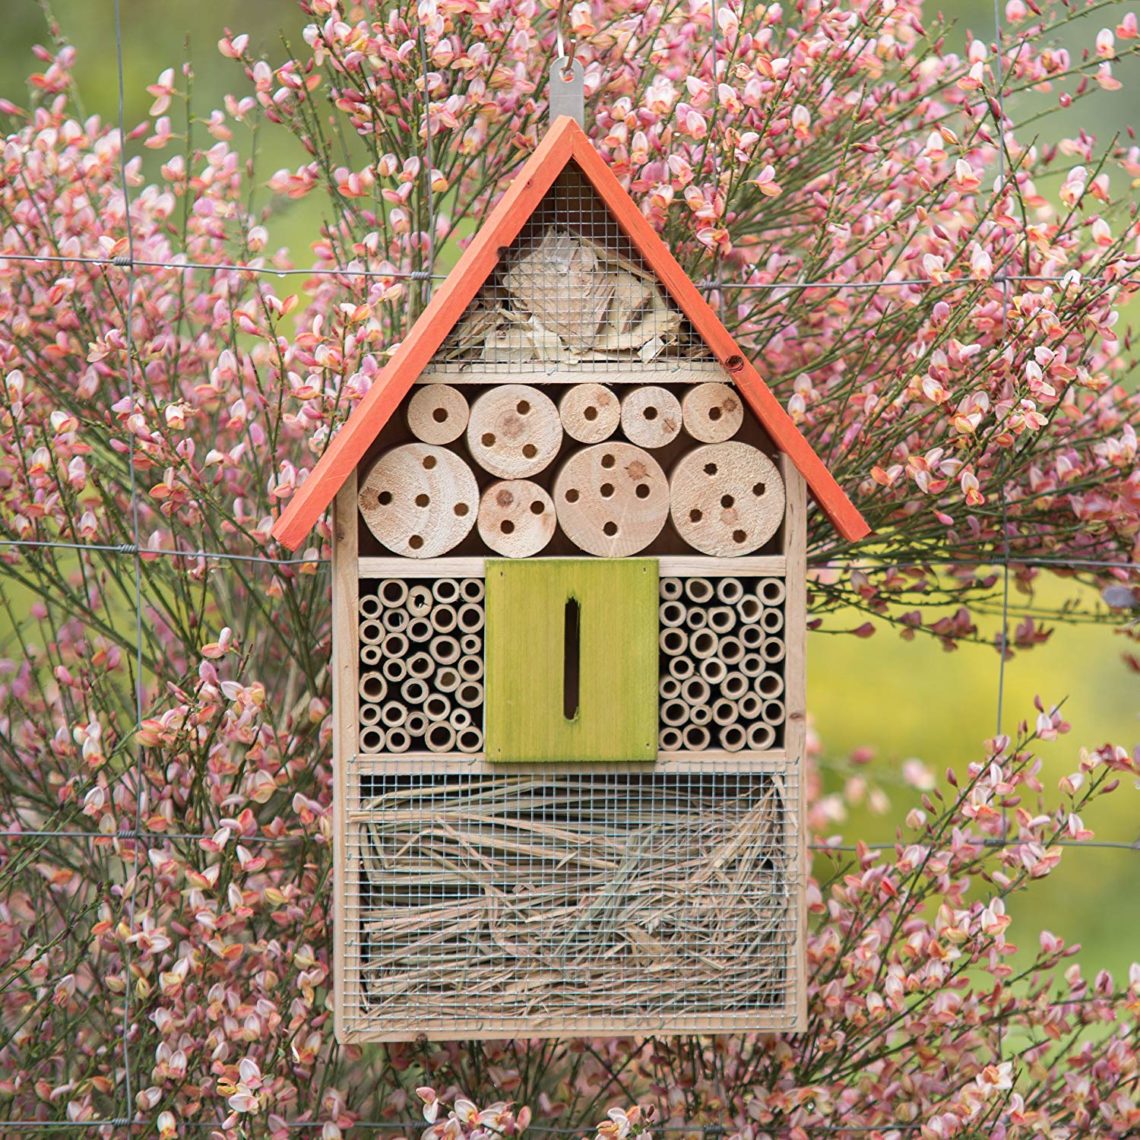 The Insect Hotel by David Stringer